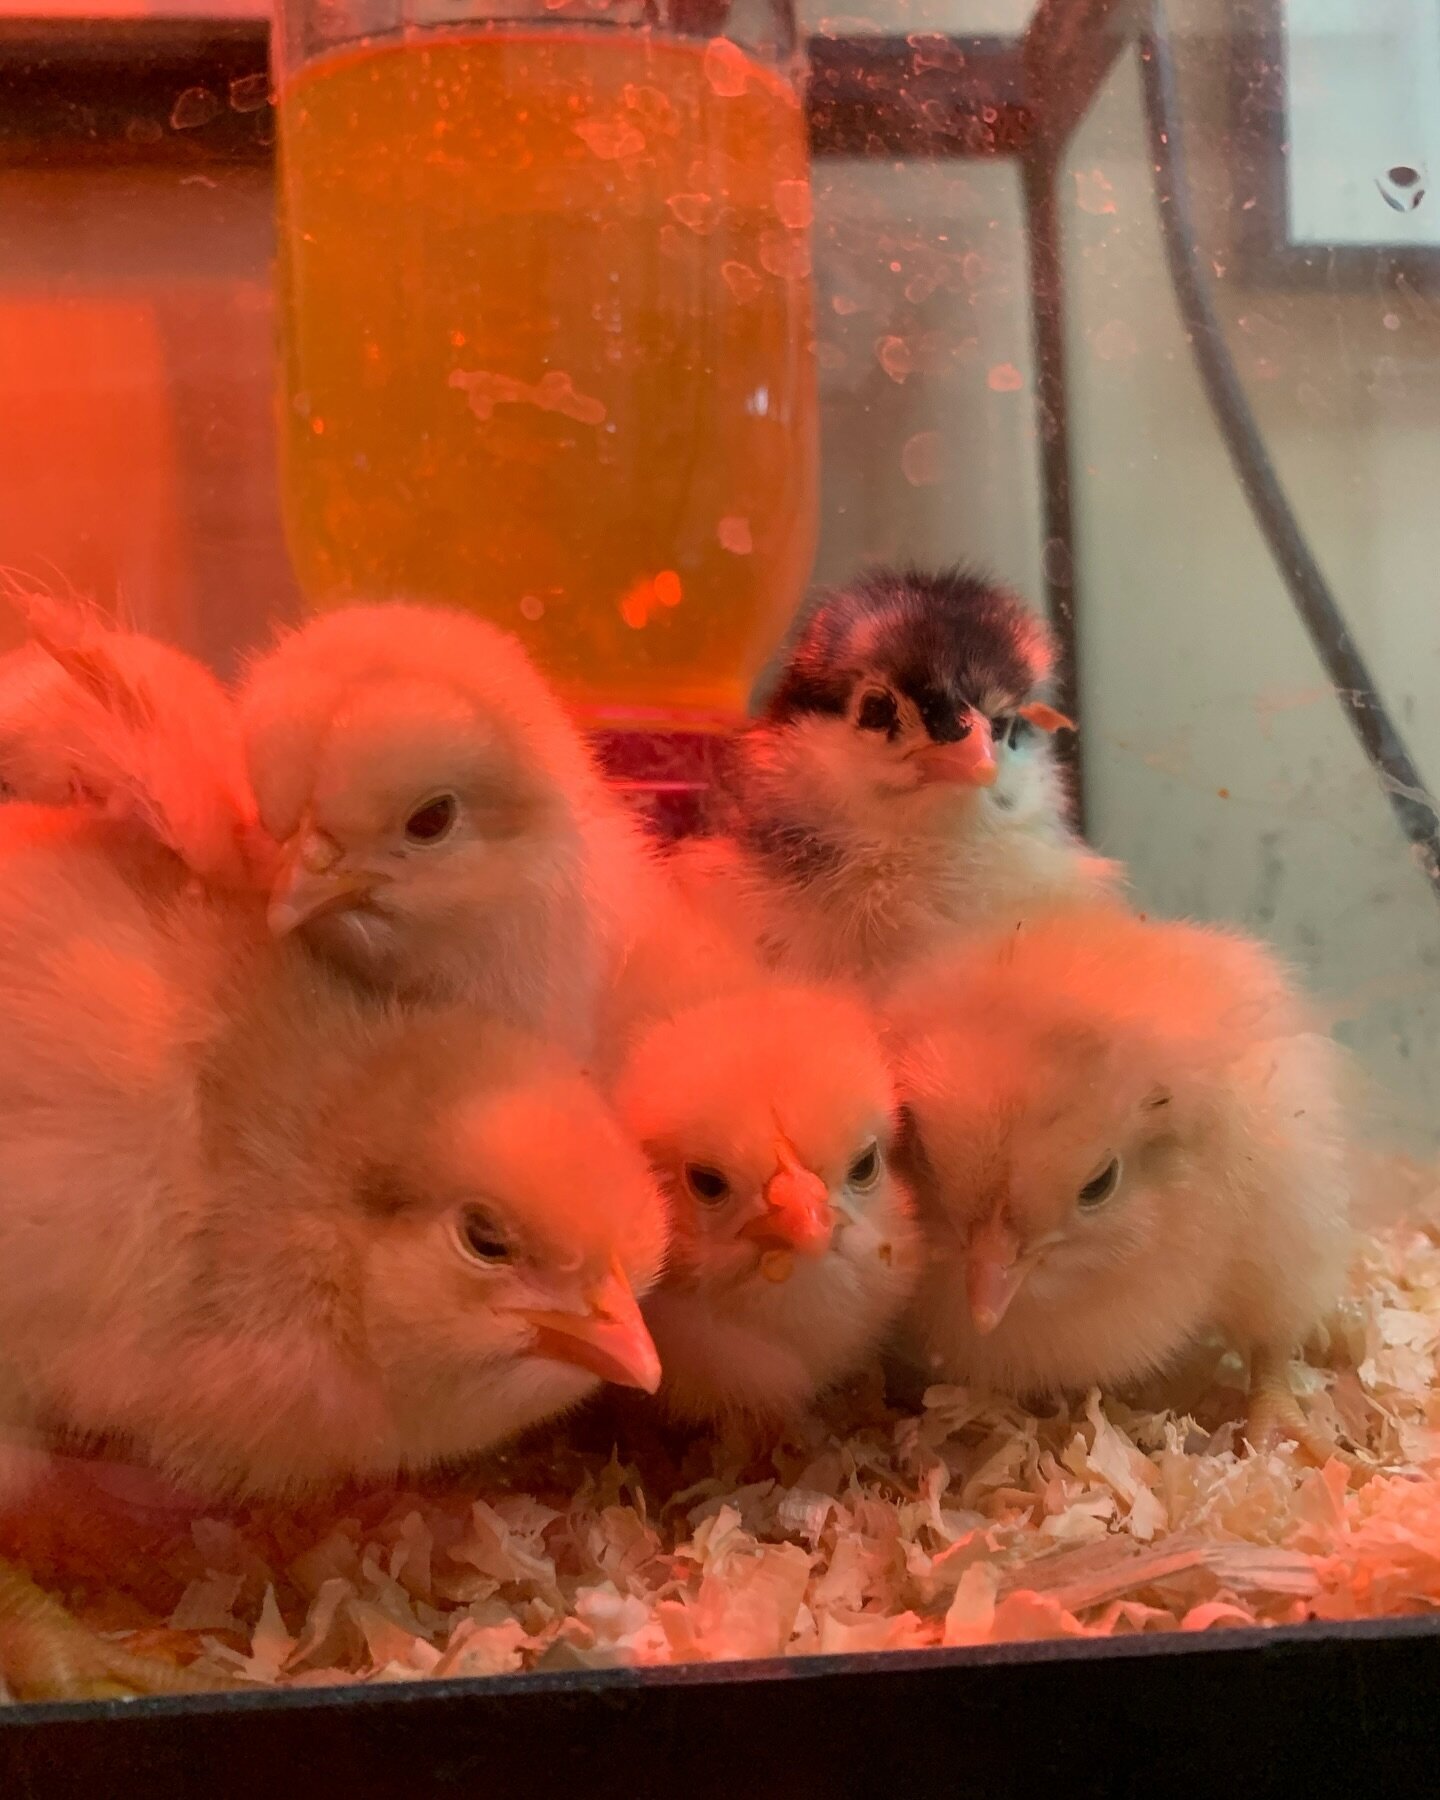 &ldquo;Okay, huddle in! Group photo time!&rdquo; 🤳🏻🐣
-
-
Our 2nd batch of chicks have arrived! Only two more suoments to go! We still have some availability on our June 3rd shipment! Check out our website or our Facebook to fill out a form today!